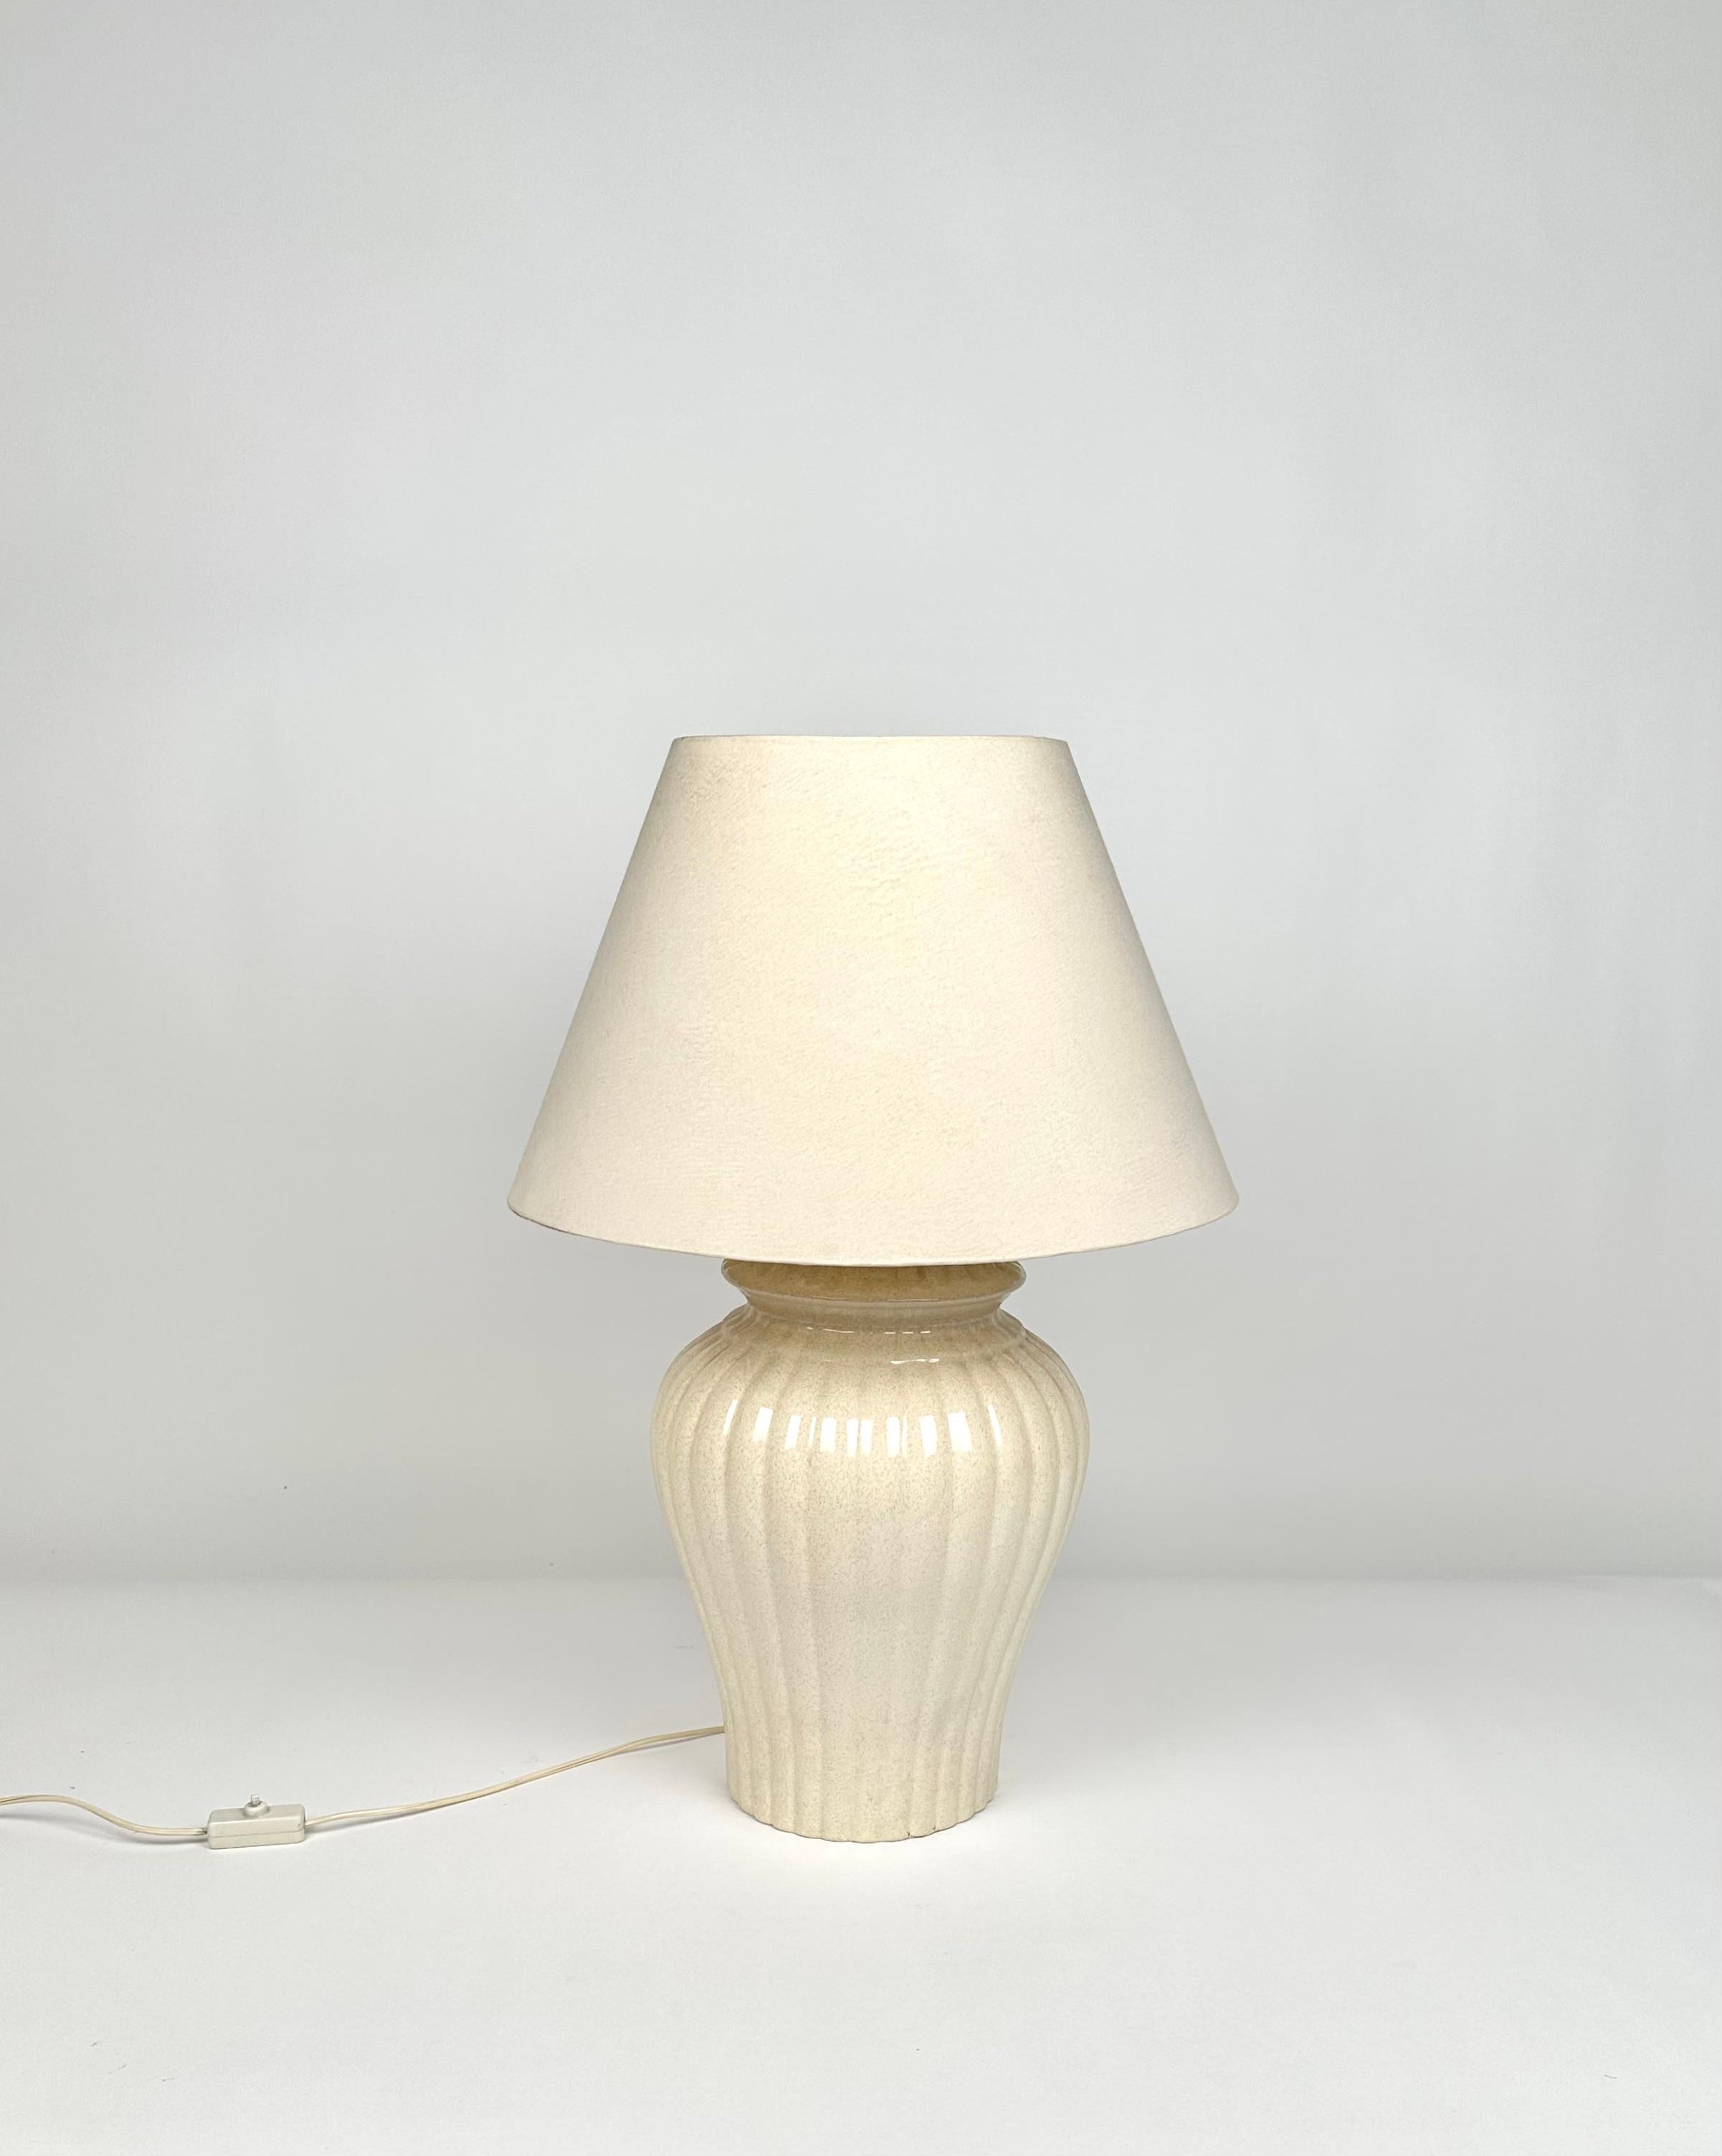 Beautiful table lamp in ceramic by Italian design Tommaso Barbi for B ceramice.

Made in Italy in the 1970.

The original signature stamps are still visible on the bottom of the lamp, as shown in the pictures.